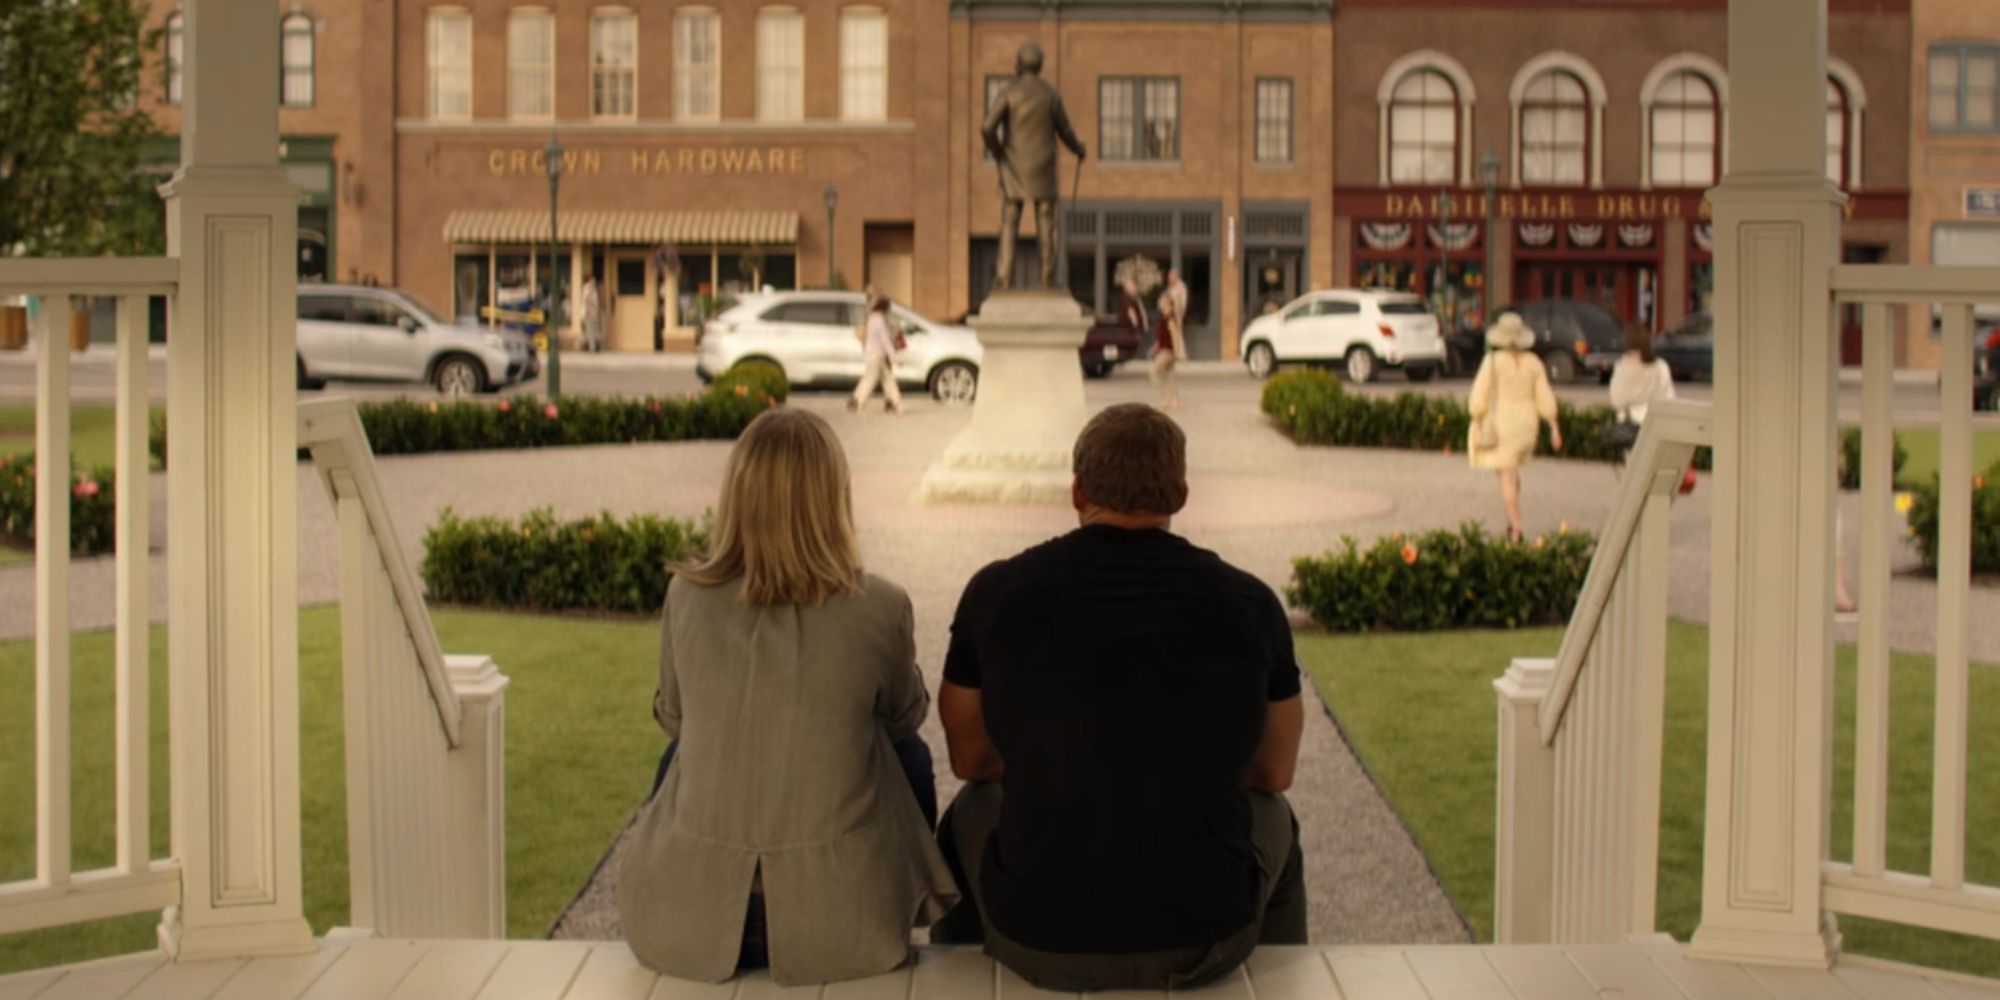 Alan Ritchson as Reacher and Willa Fitzgerald as Roscoe Conklin sitting next to each other from behind.